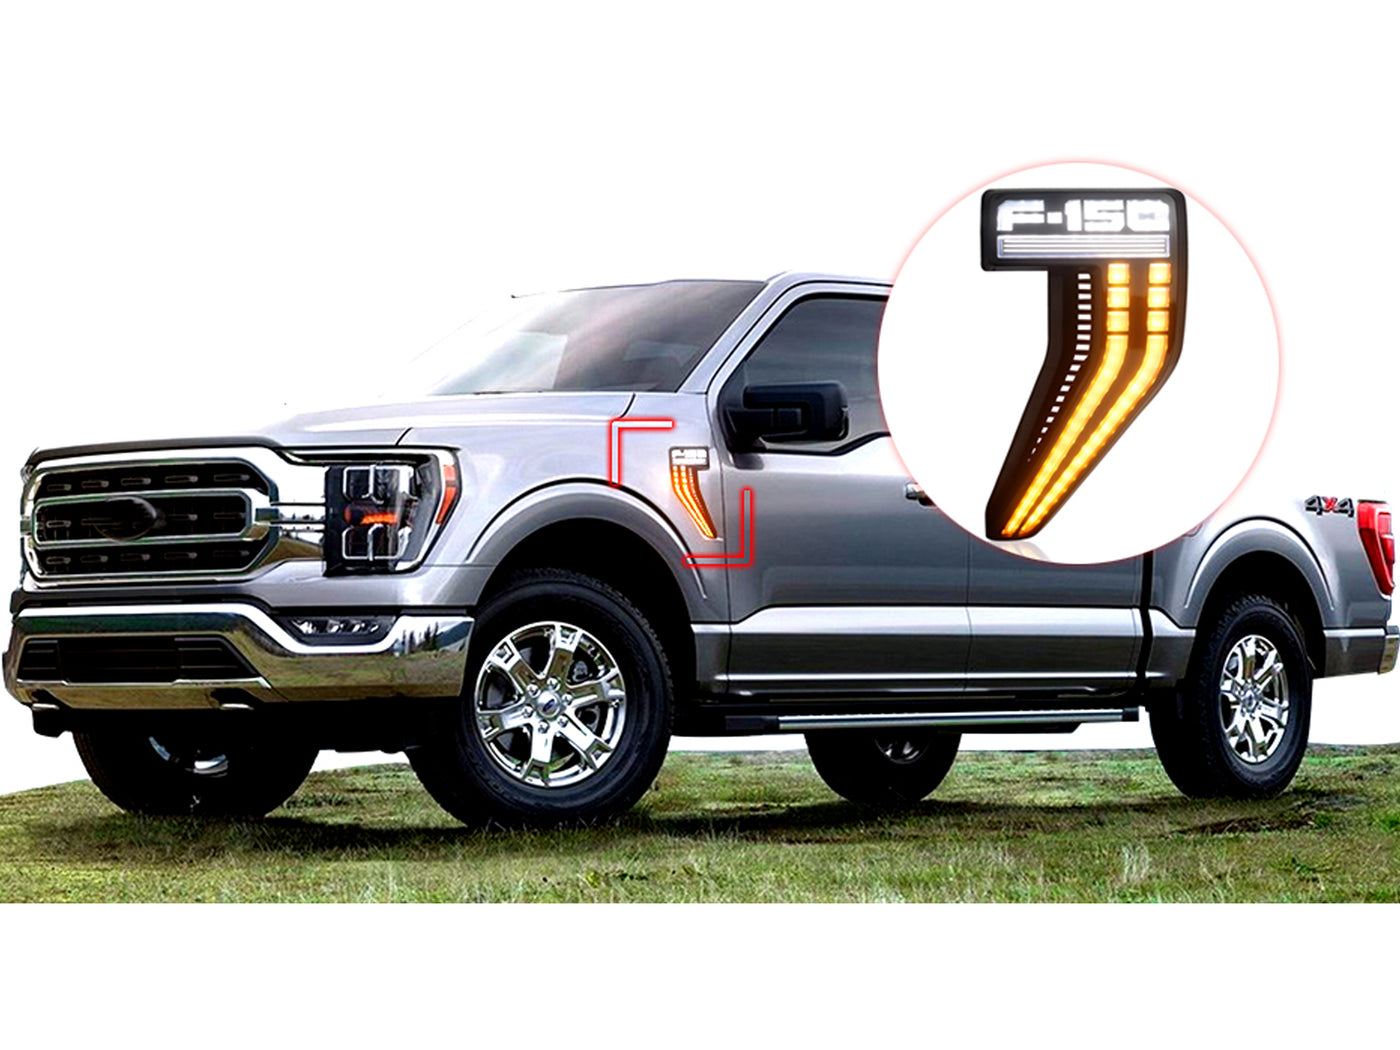 Branqueas Laterales Led Drl Tipo Raptor para Ford F-150 2021-2023